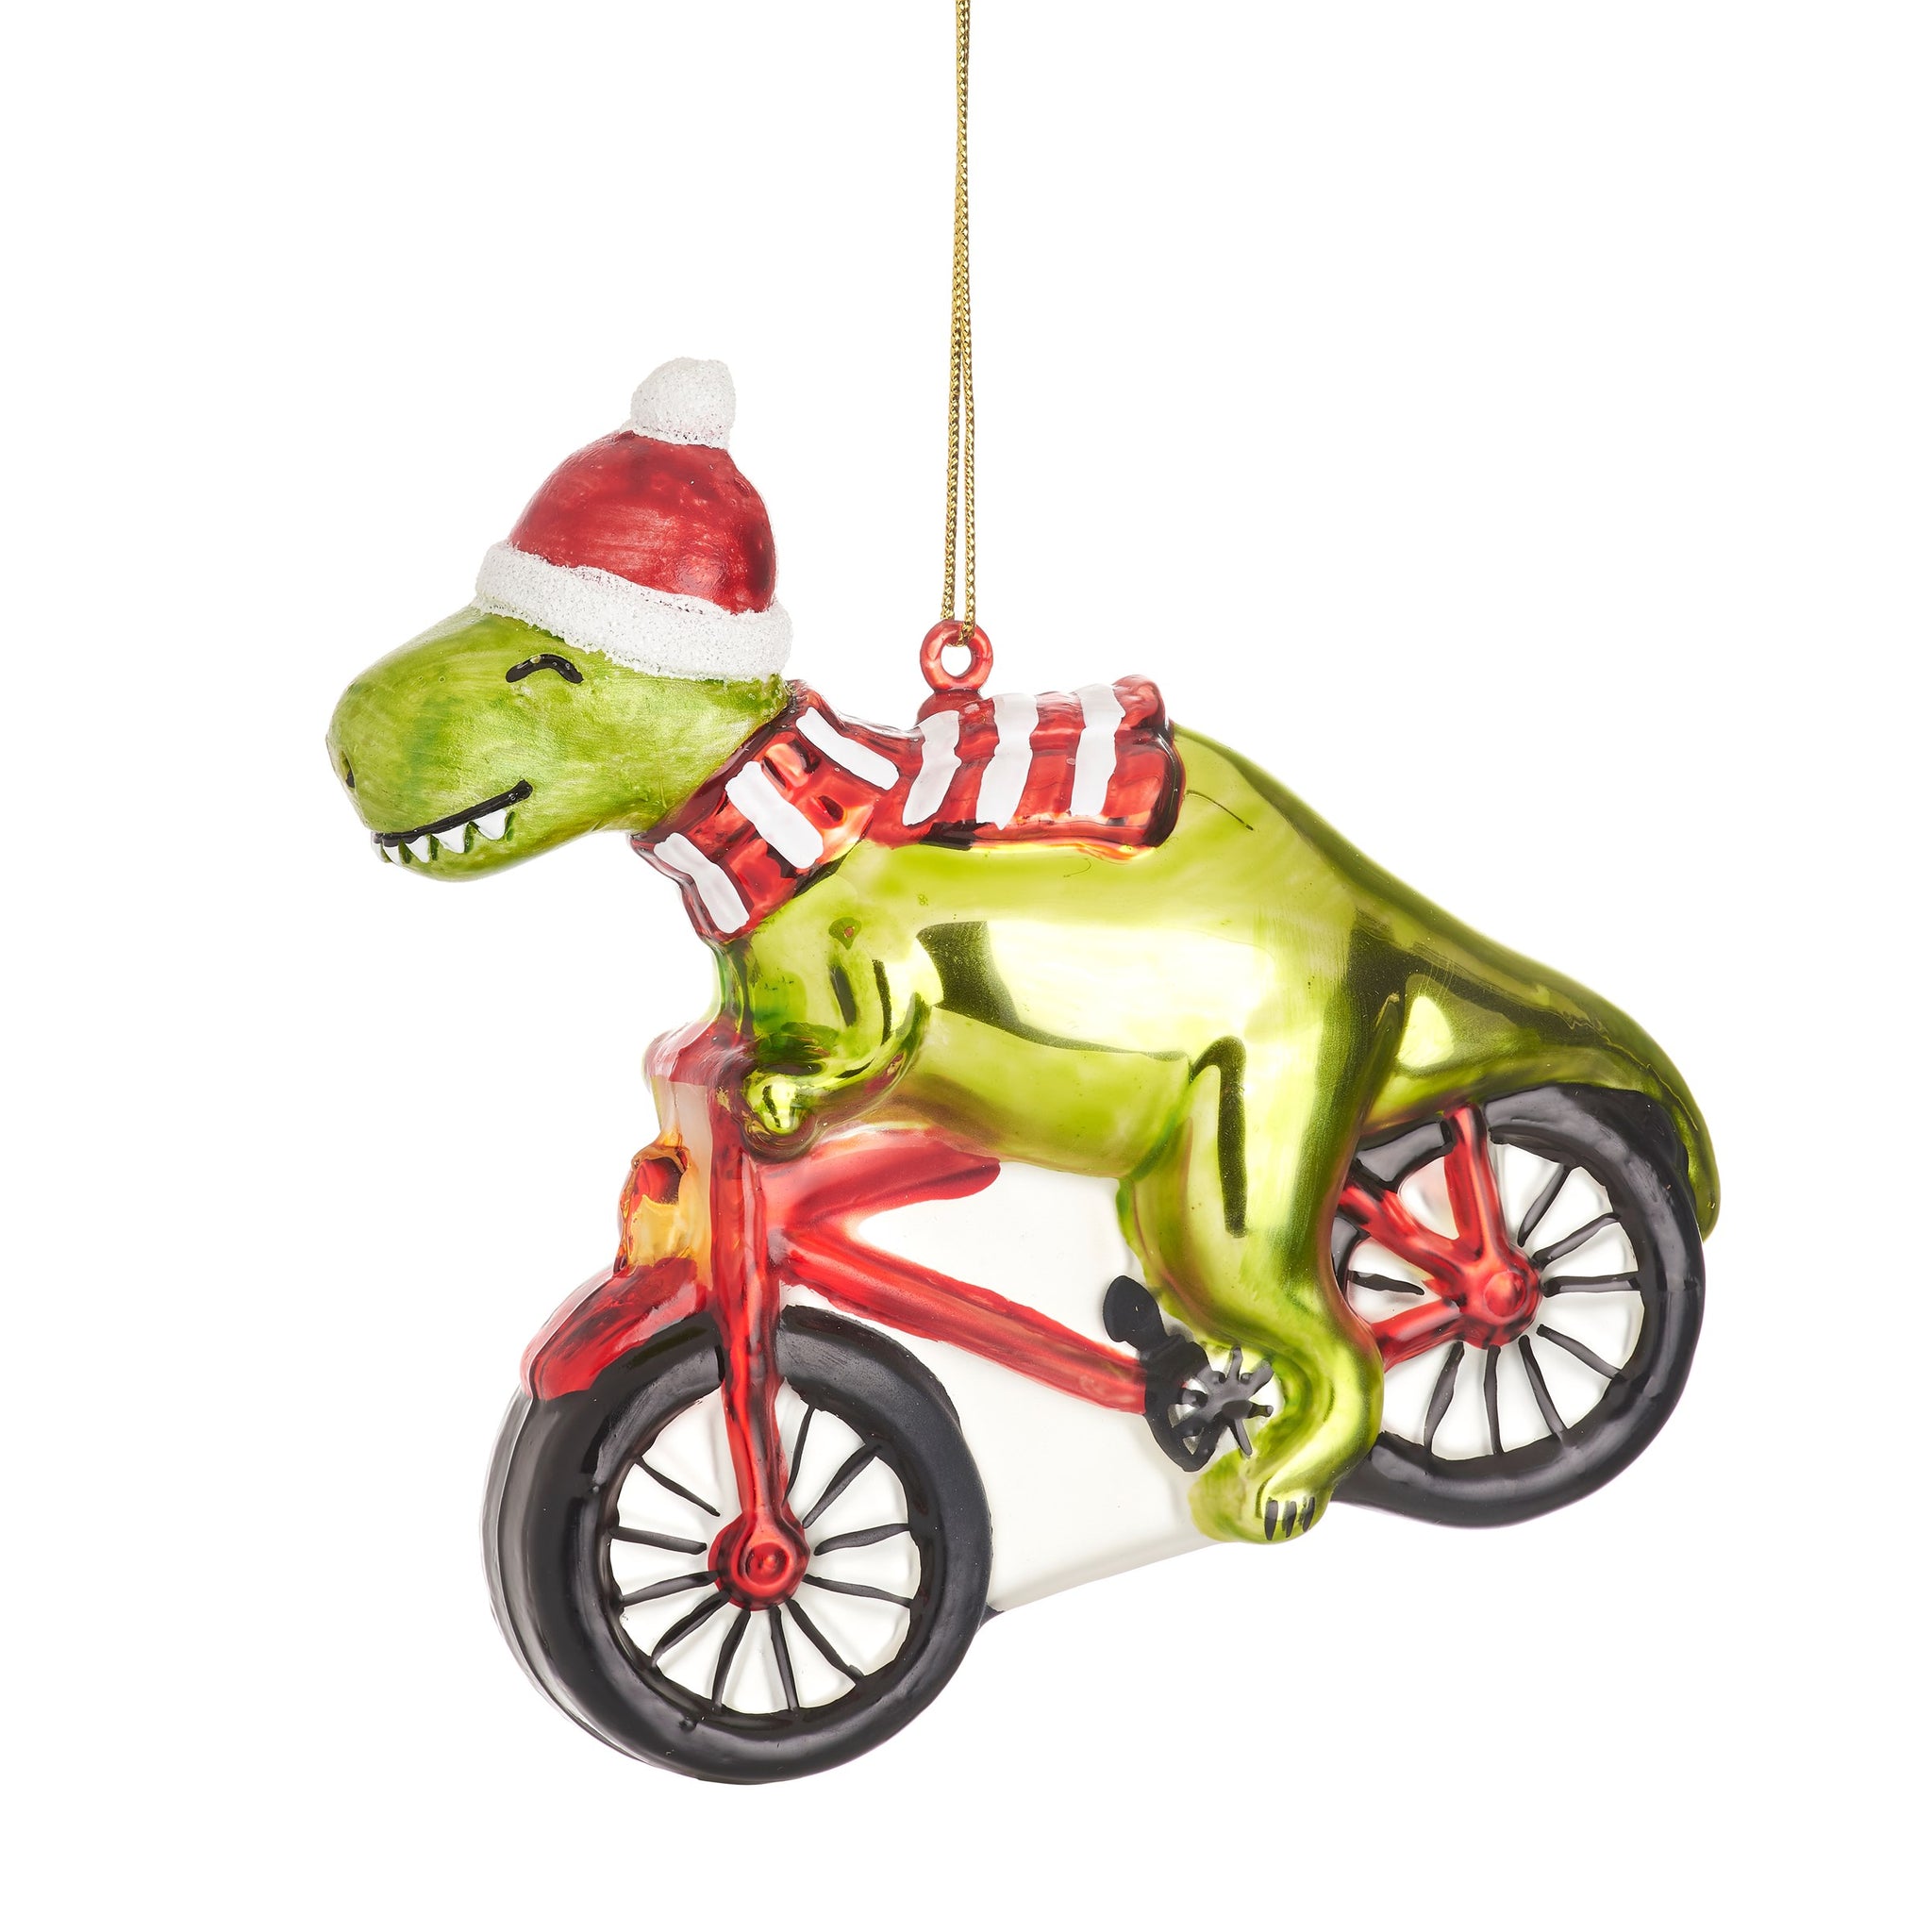 DINOSAUR ON A BYCICLE SHAPED BAUBLE